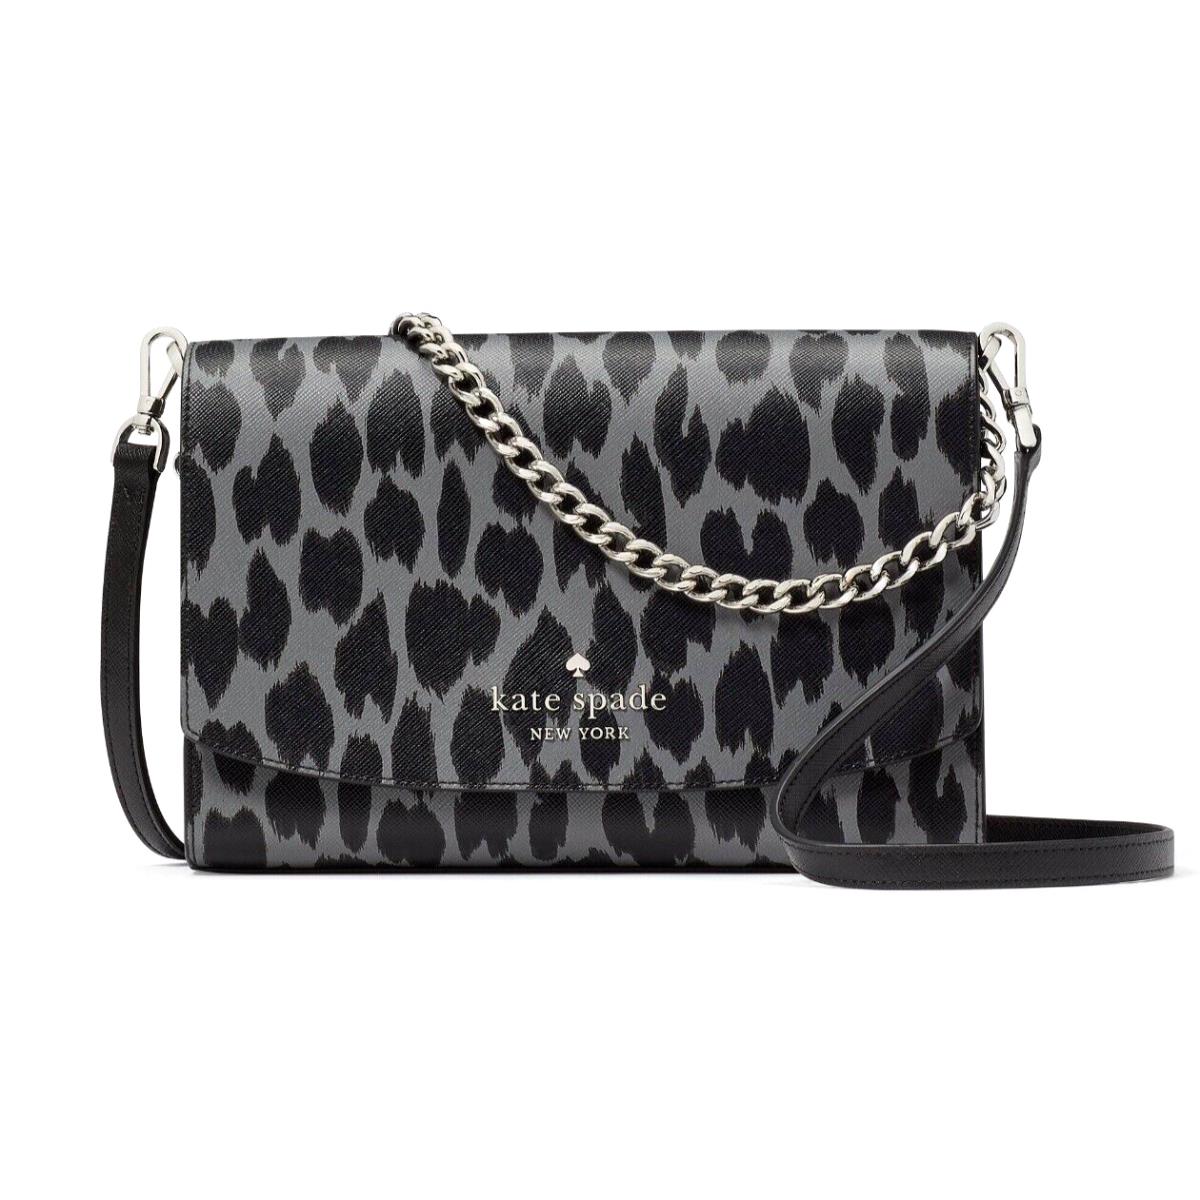 New Kate Spade Carson Convertible Crossbody Saffiano Spotted Animal Printed